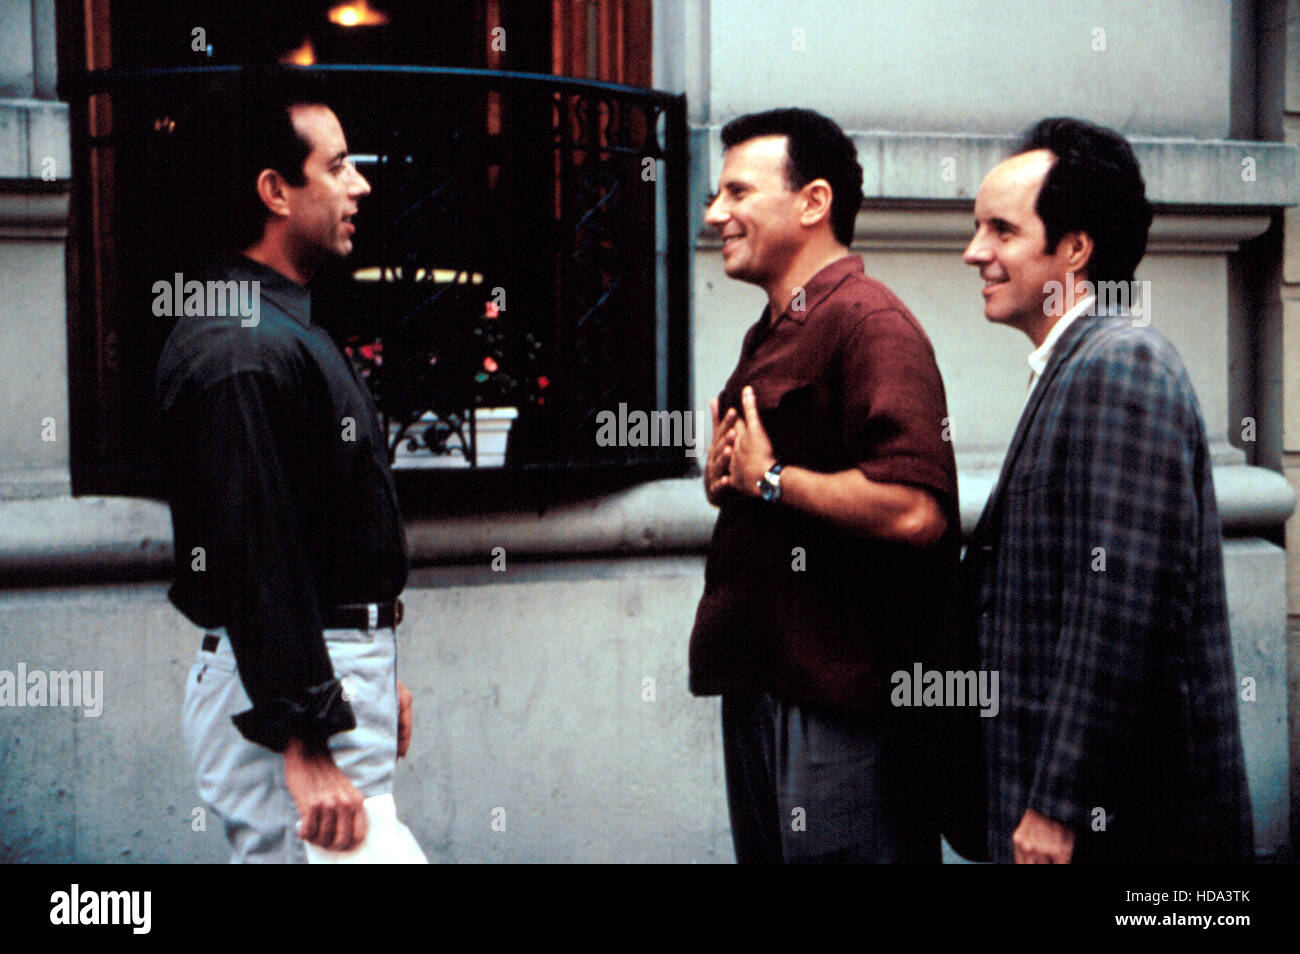 MAD ABOUT YOU, Jerry Seinfeld, Paul Reiser, John Pankow, 1992-99, episode  'Season Opener' aired 2/22/98, (c)TriStar Stock Photo - Alamy